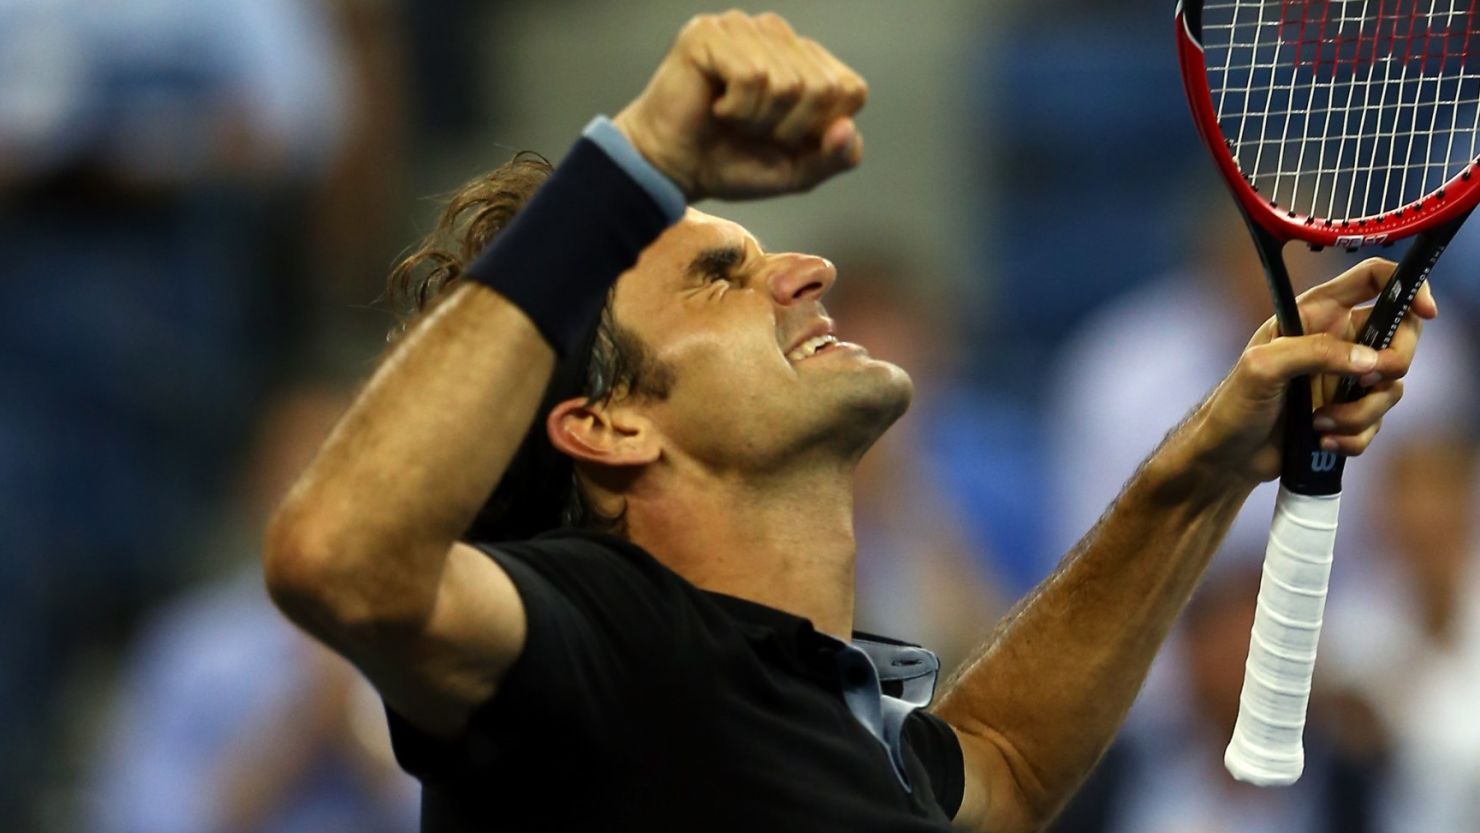 It was a combination of joy and relief for Roger Federer after he beat Gael Monfils at the U.S. Open. 